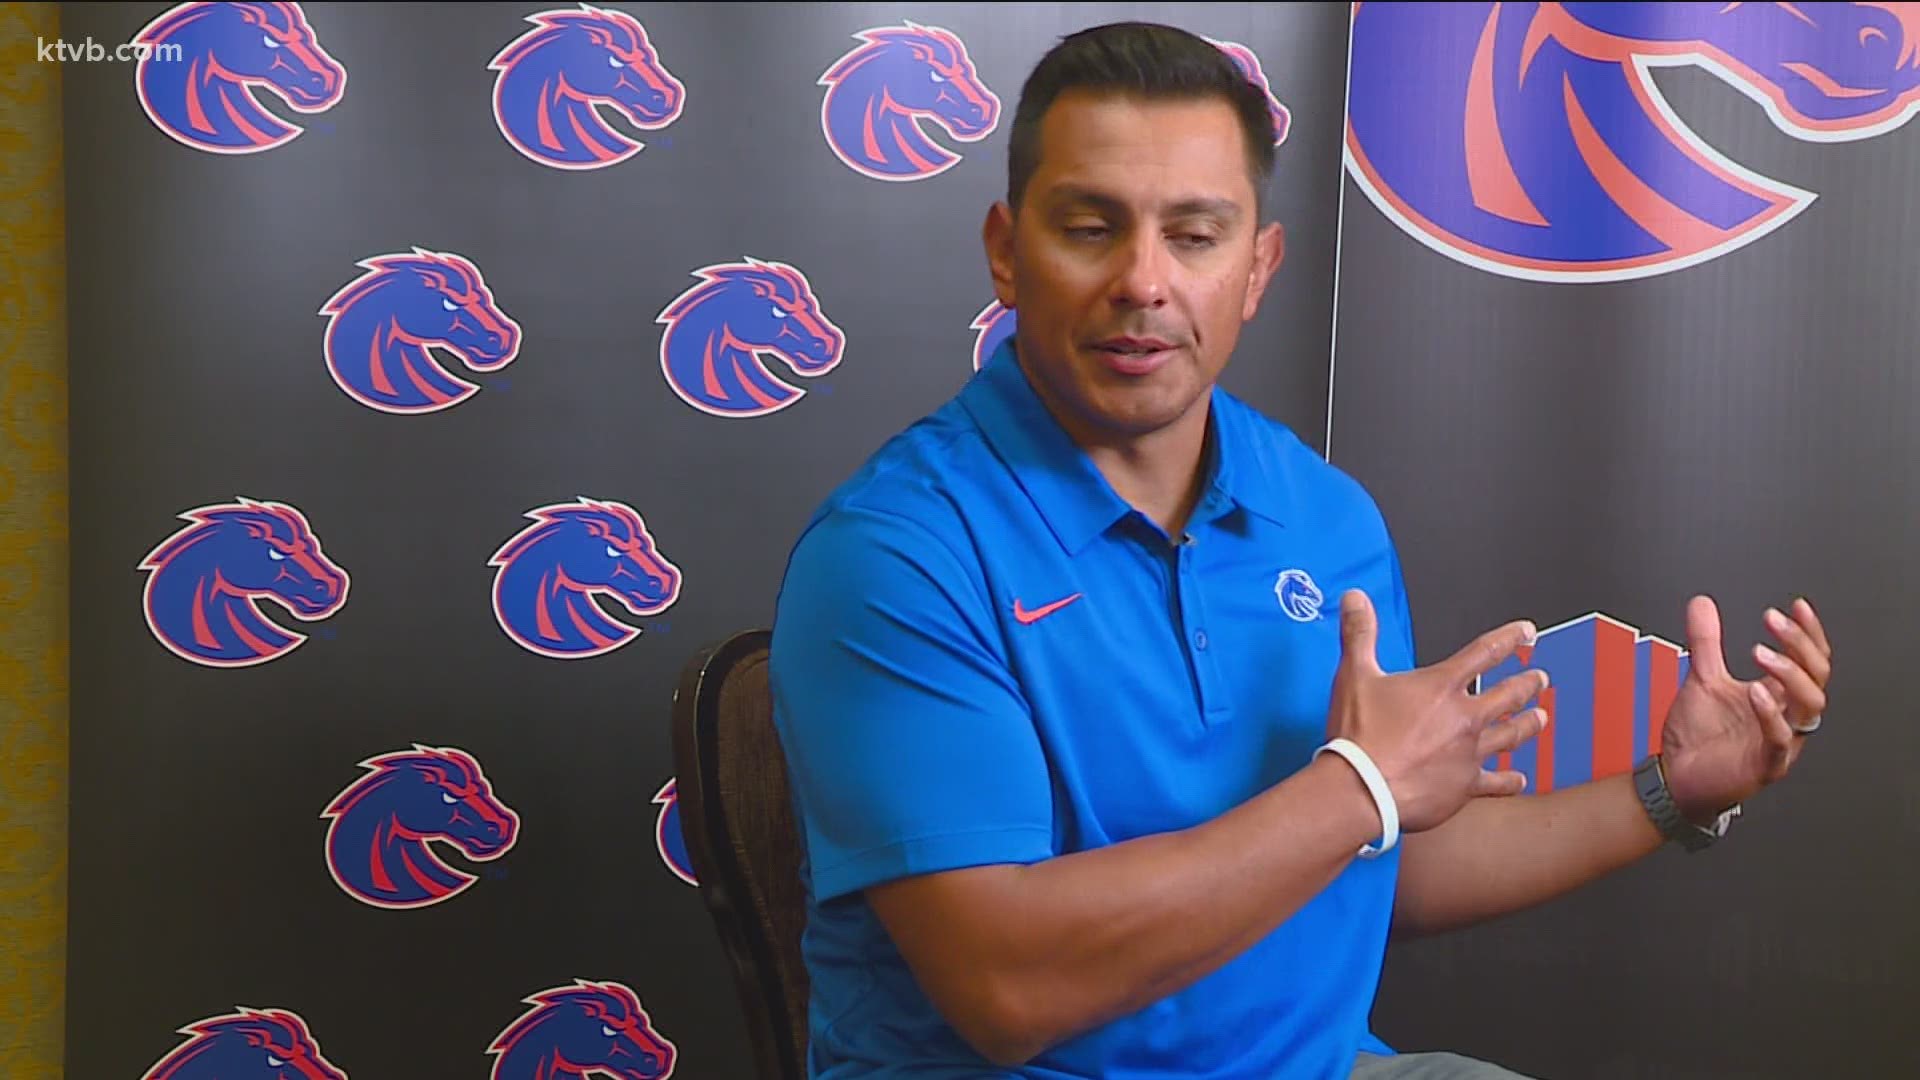 Boise State wouldn't necessarily go into specifics about players and coaches and where they rate as a program, Coach Avalos did say there' progress to be made.